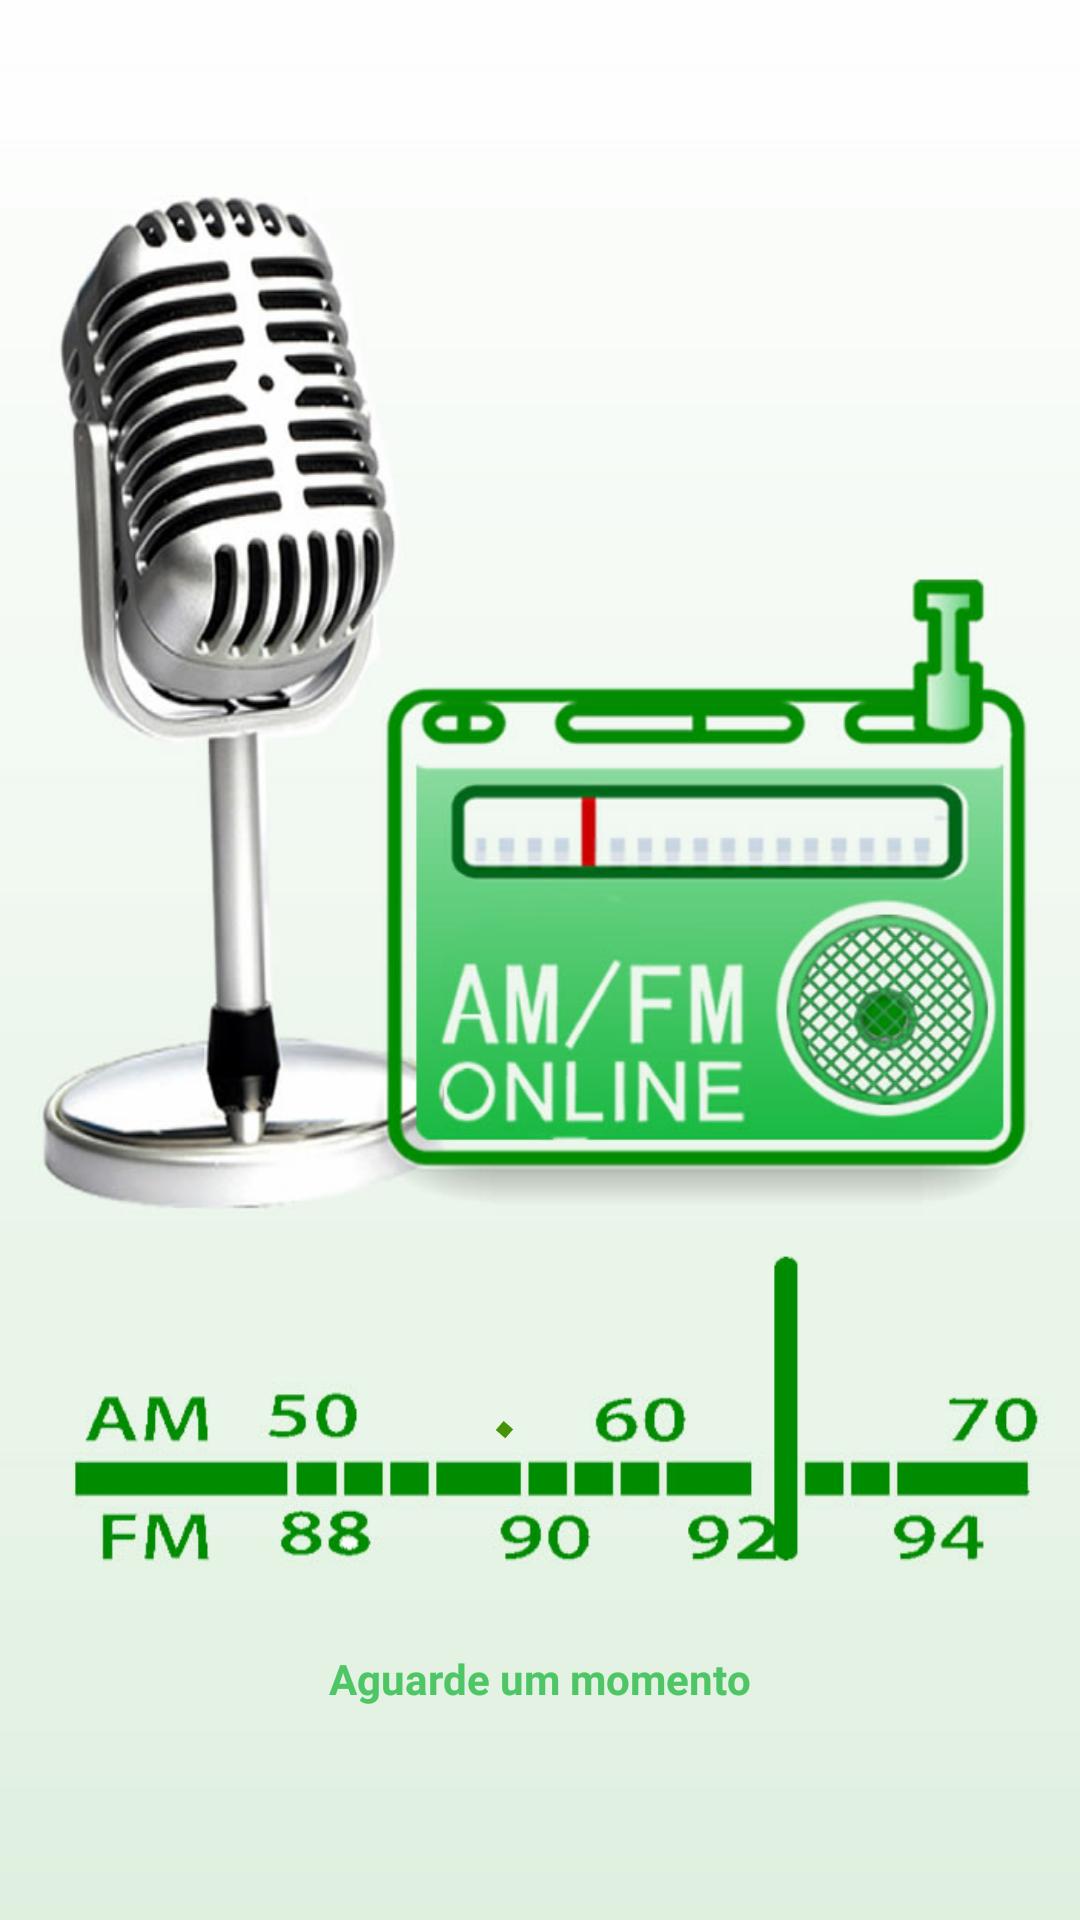 Radio AM/FM Online for Android - APK Download